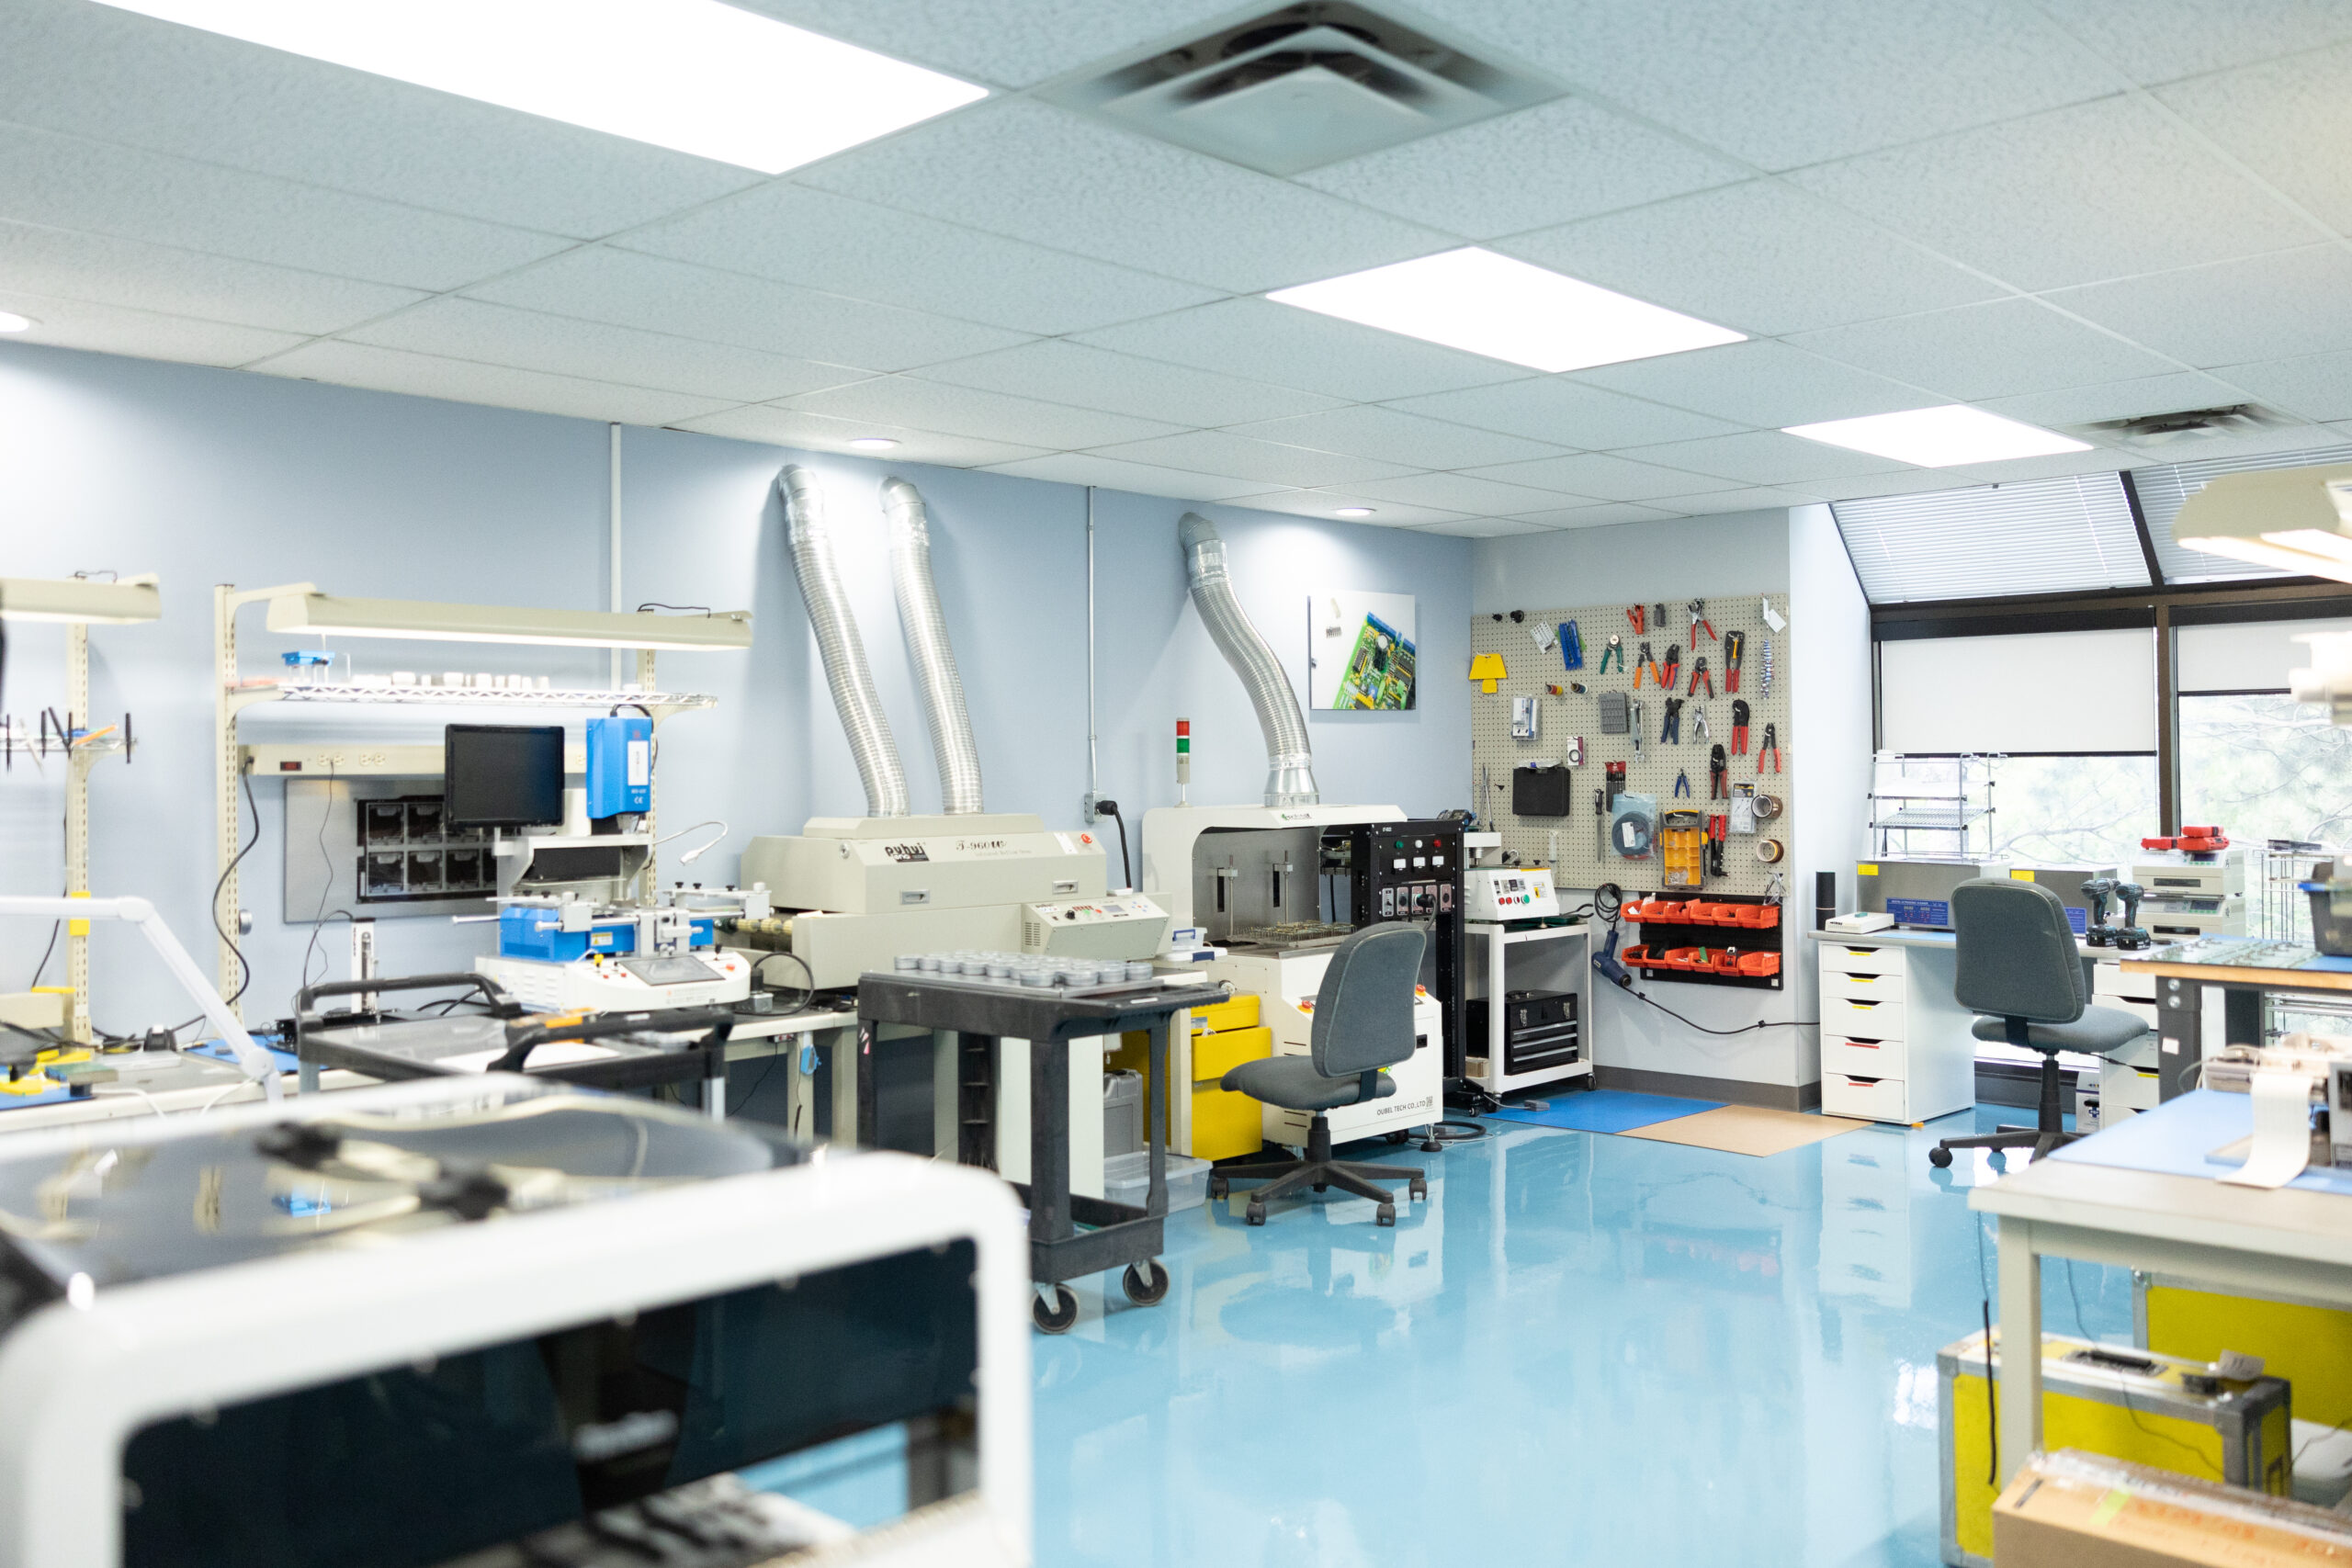 A interior view of the reverse engineering lab at ENA